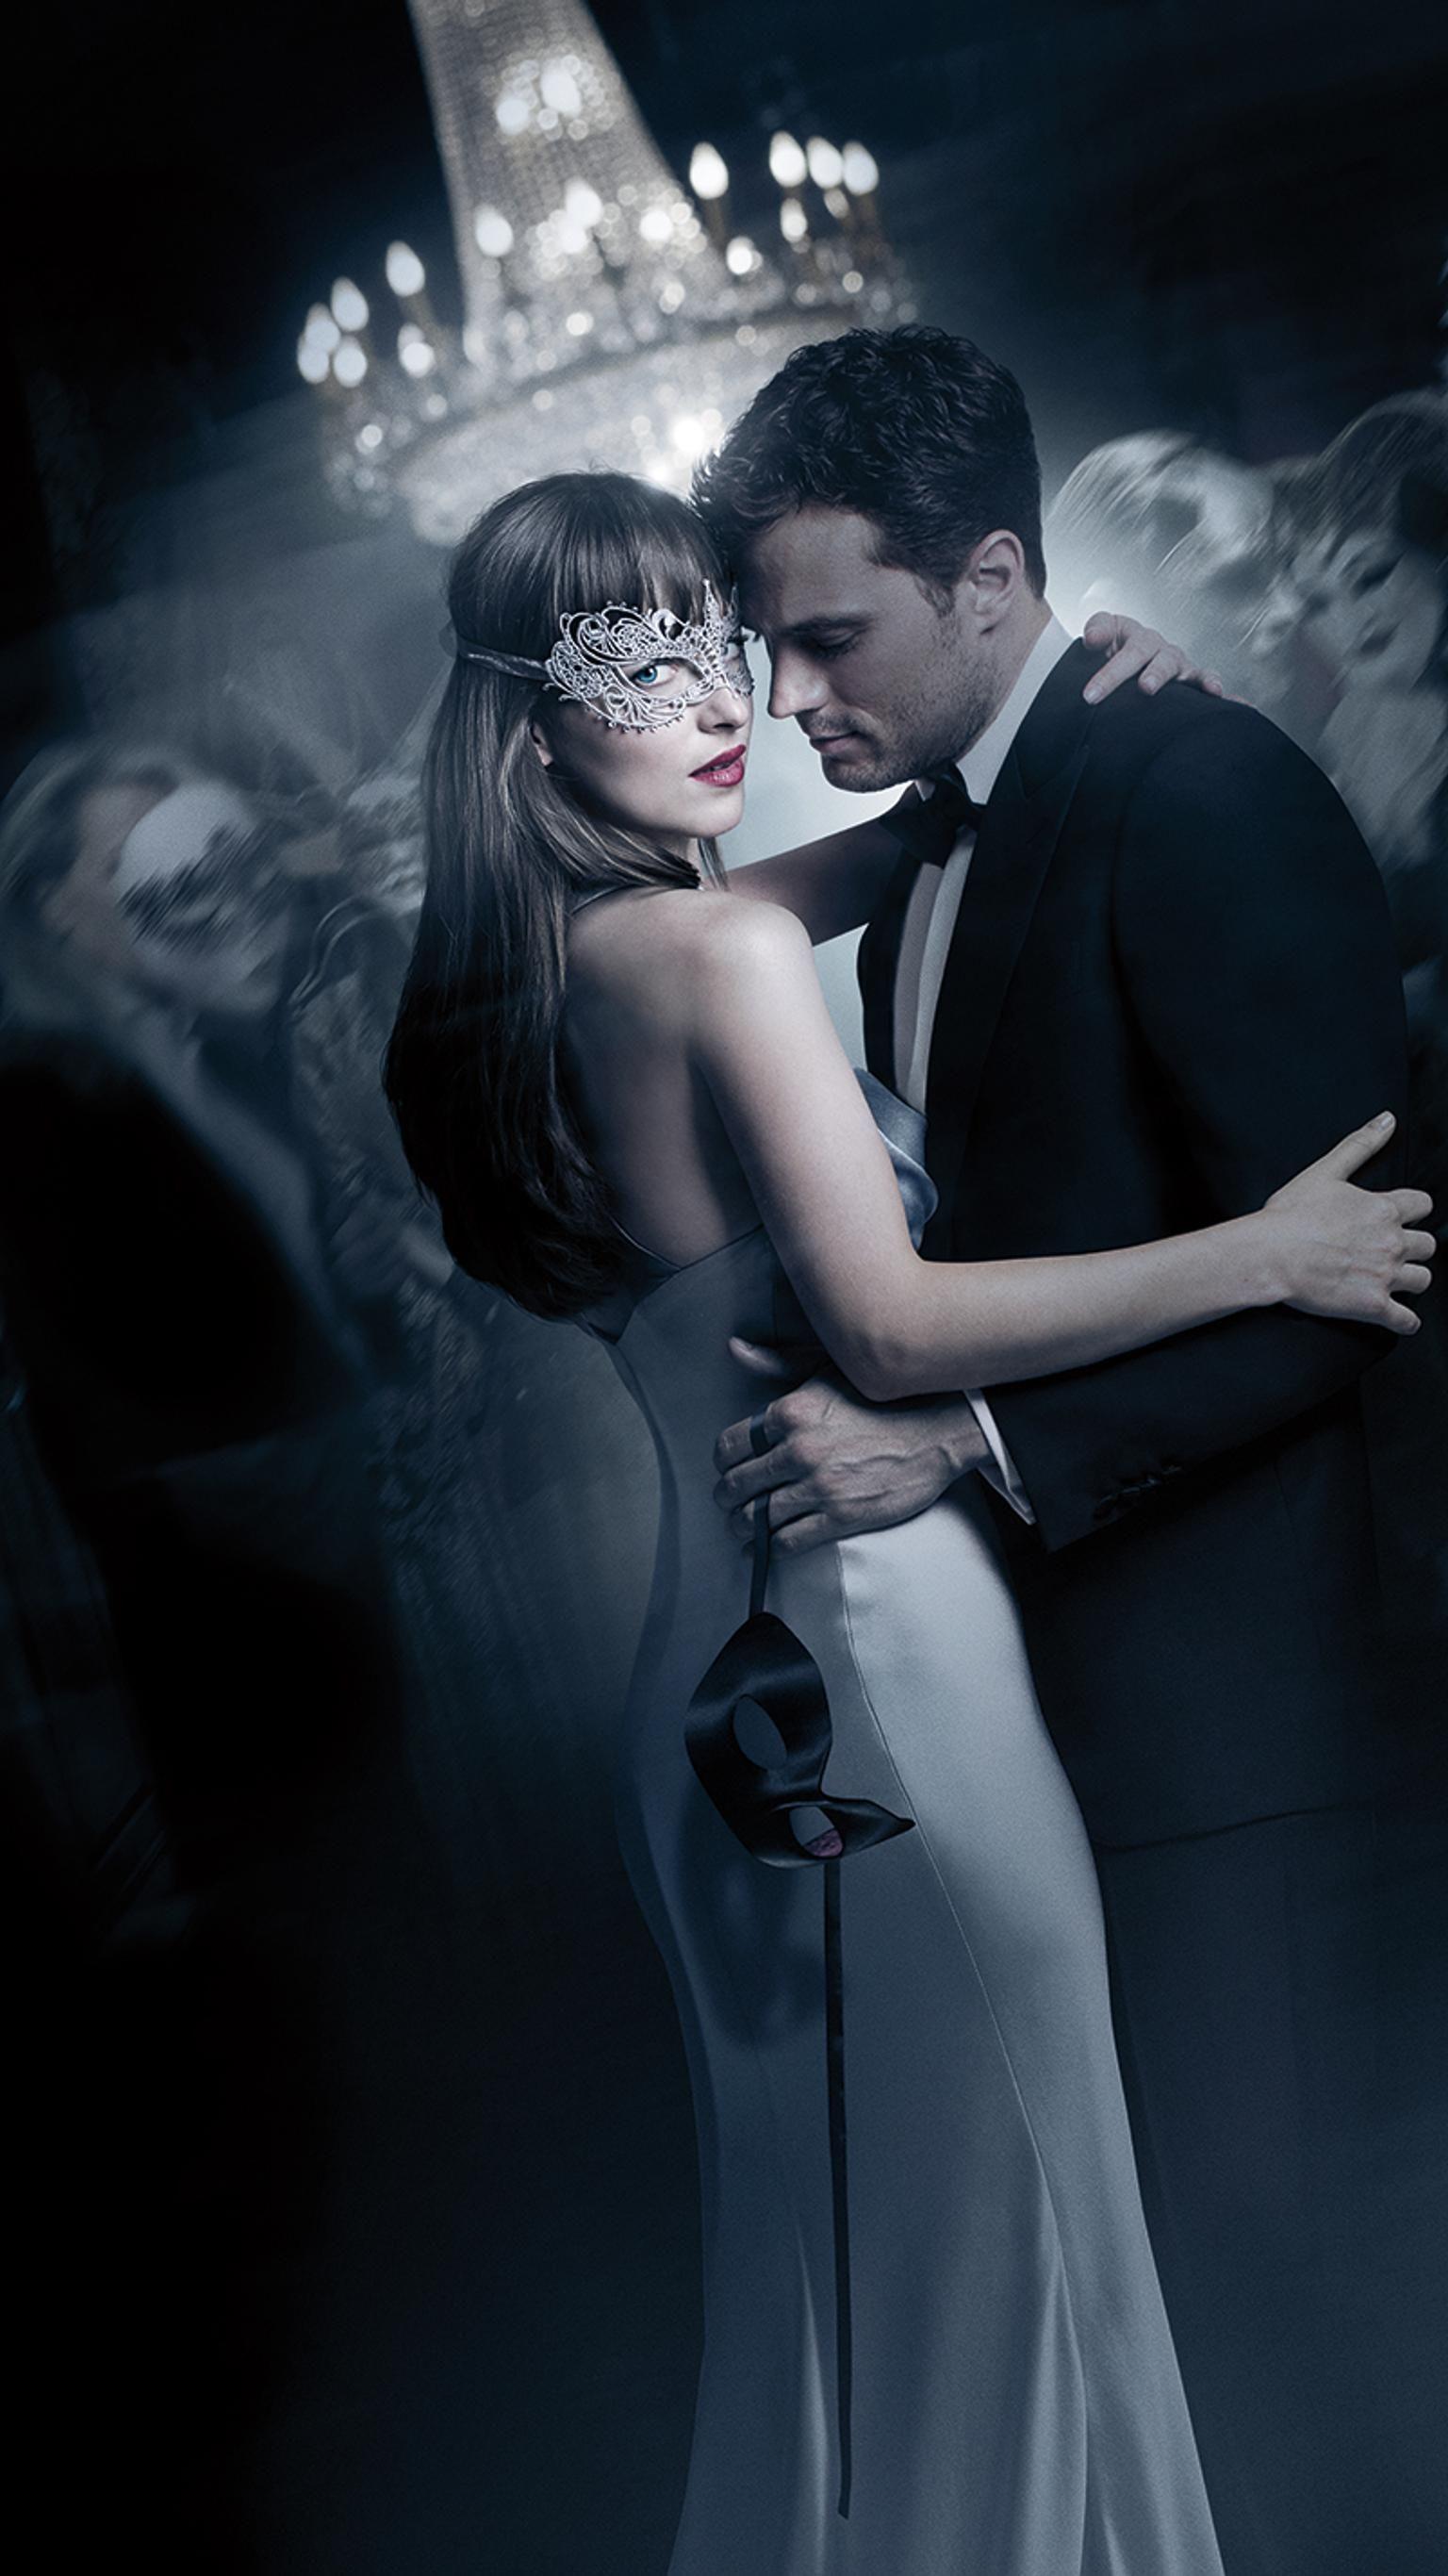 fifty shades of grey movie download for mobile